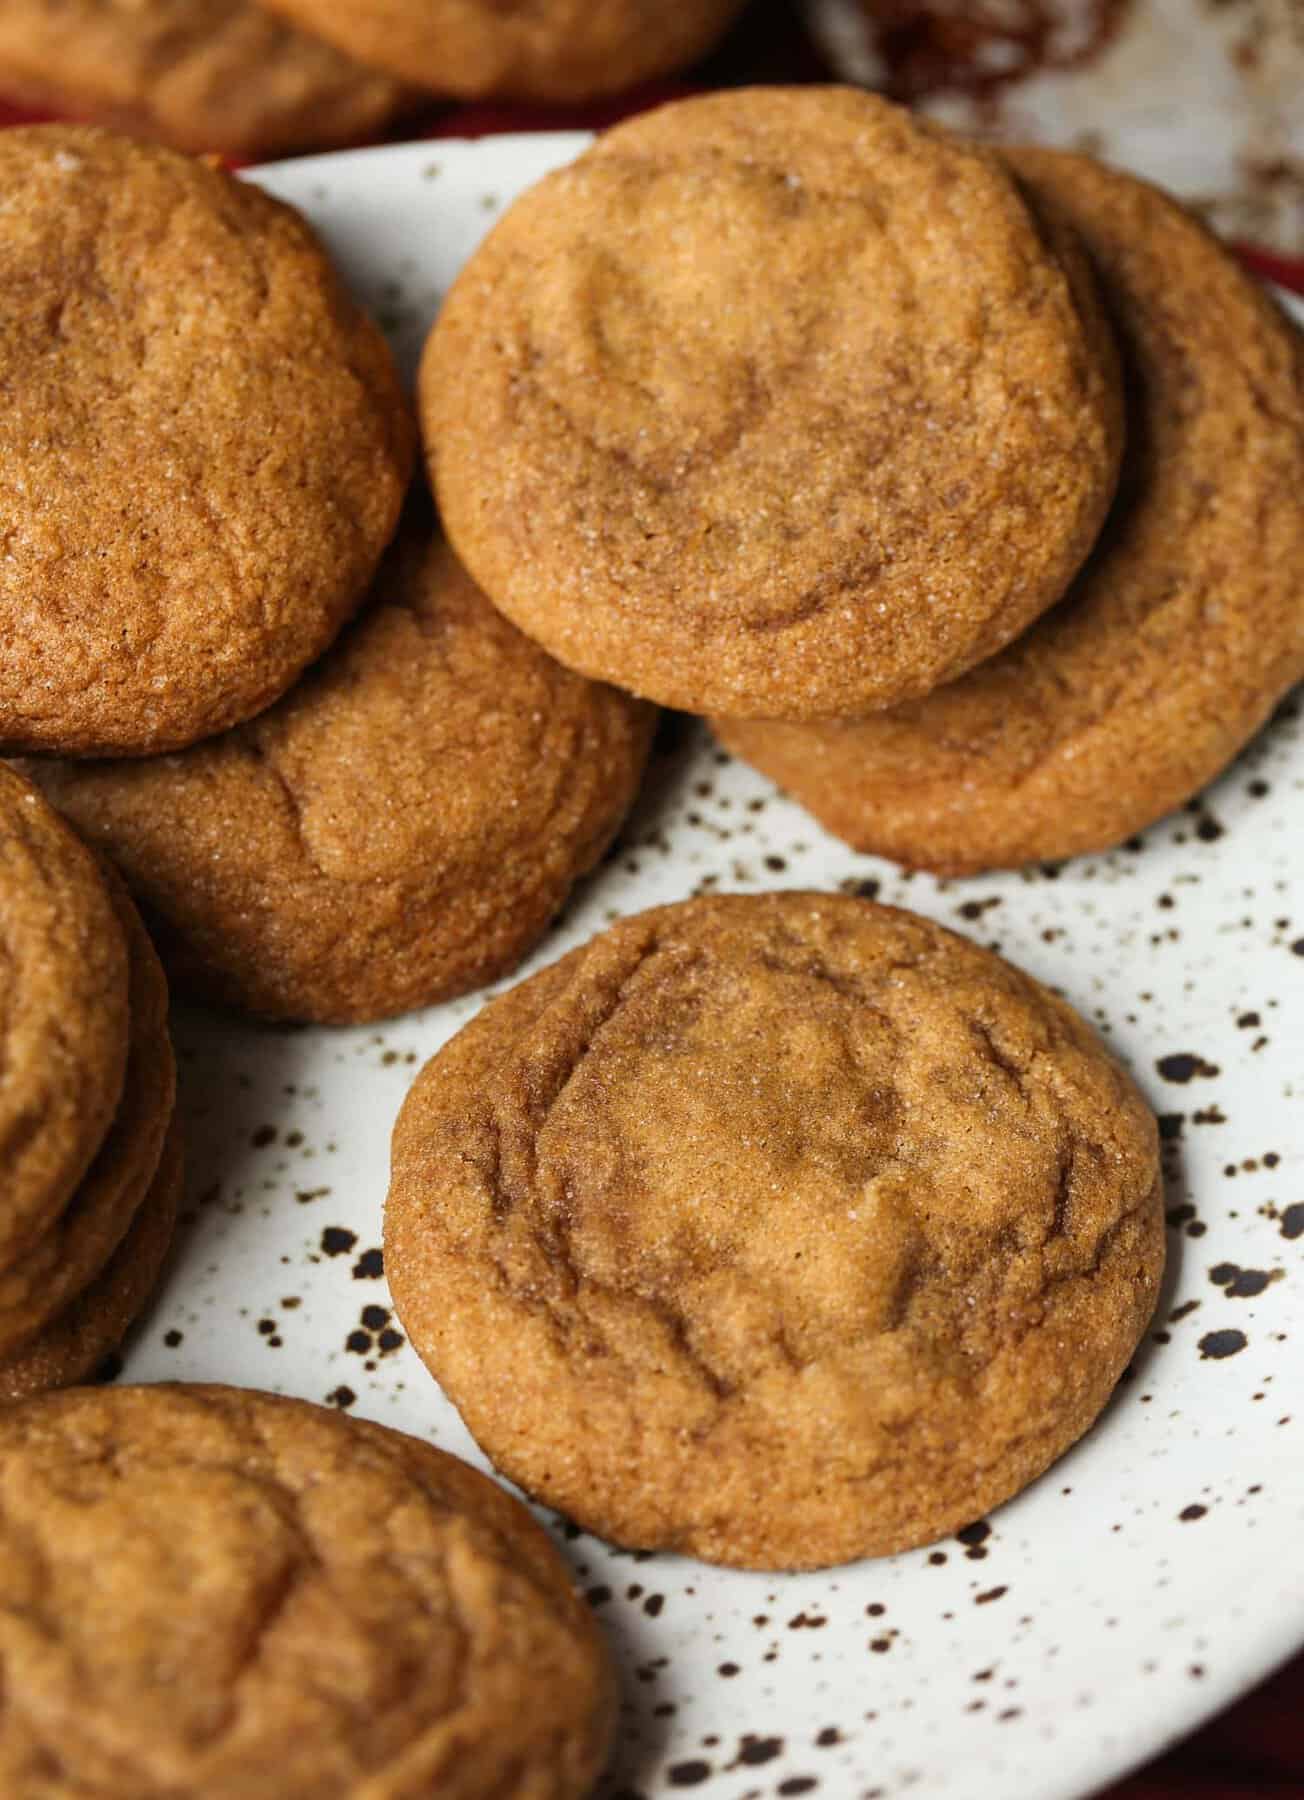 Chewy molasses cookies scattered on a plate.